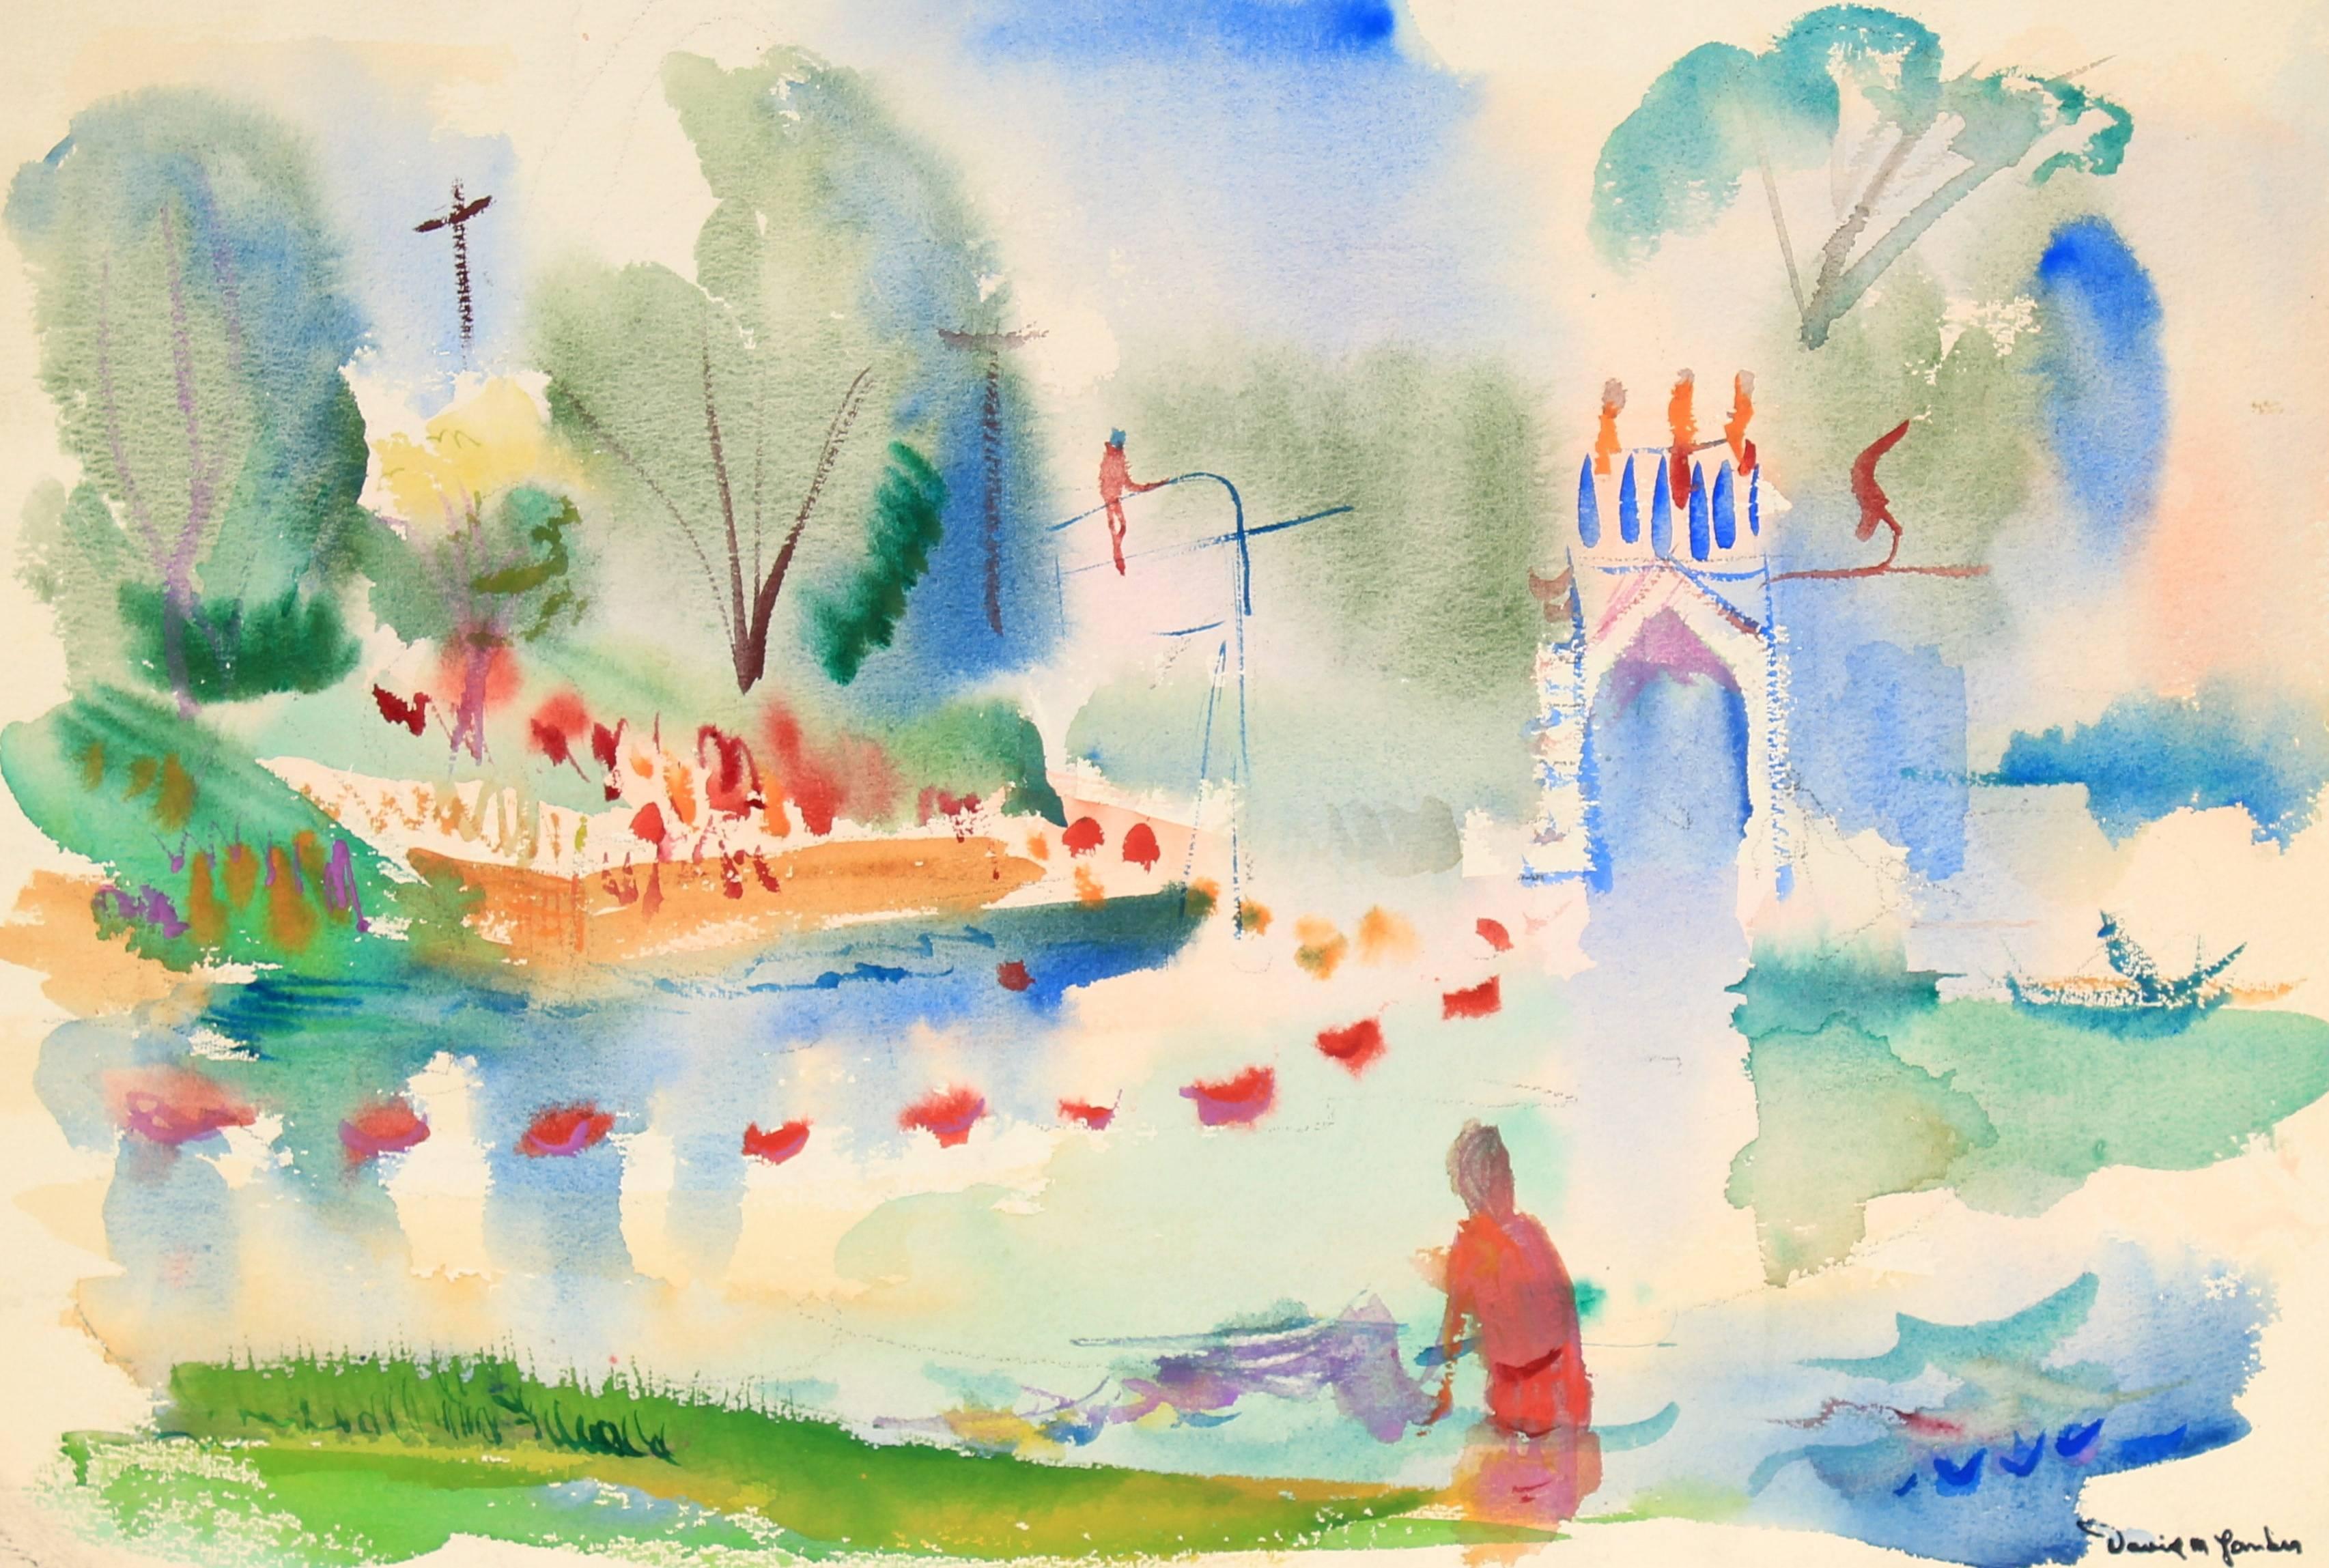 David Landis Landscape Art - Abstracted Colorful Landscape in Watercolor with Swimmers, Mid 20th Century